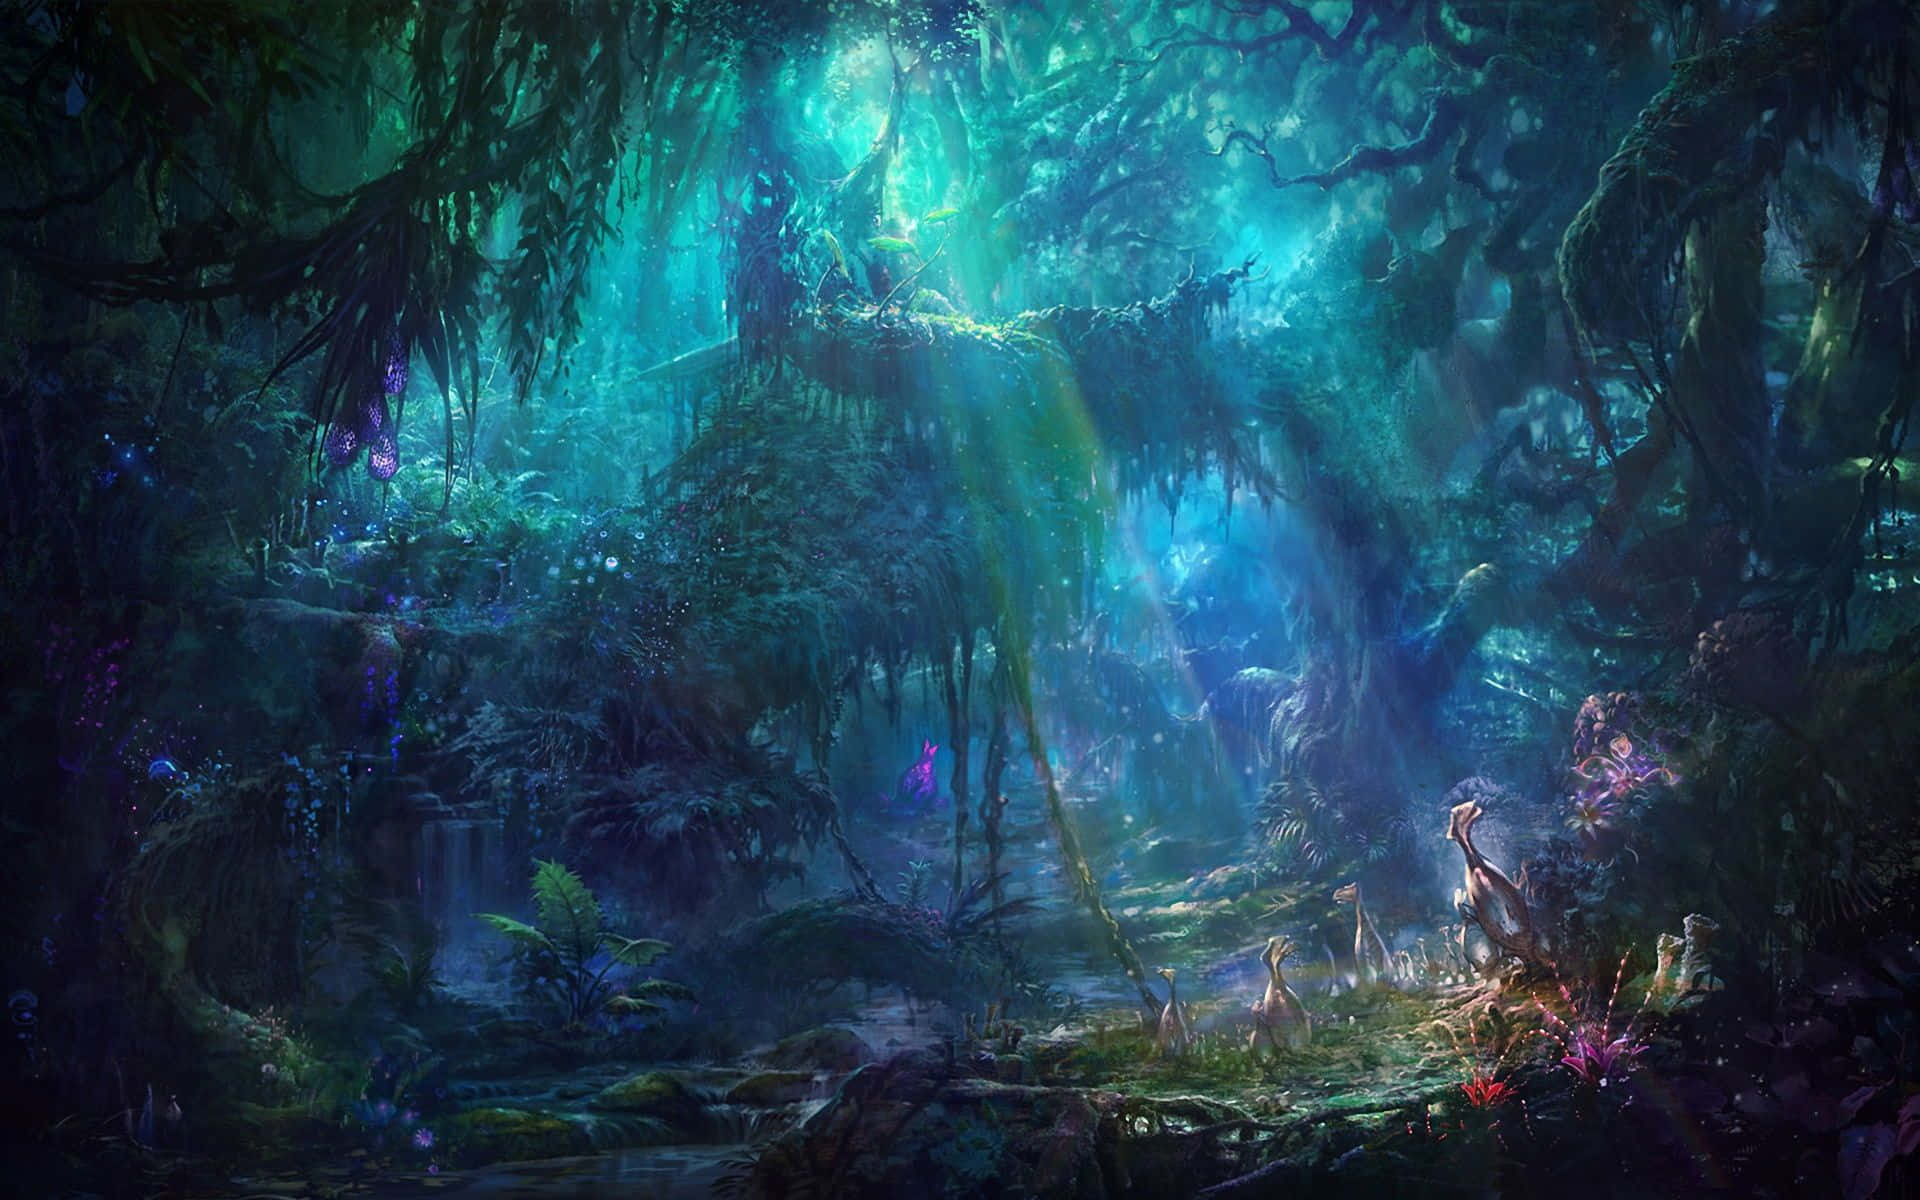 Enchanted Forest Illuminated by Sunlight Wallpaper